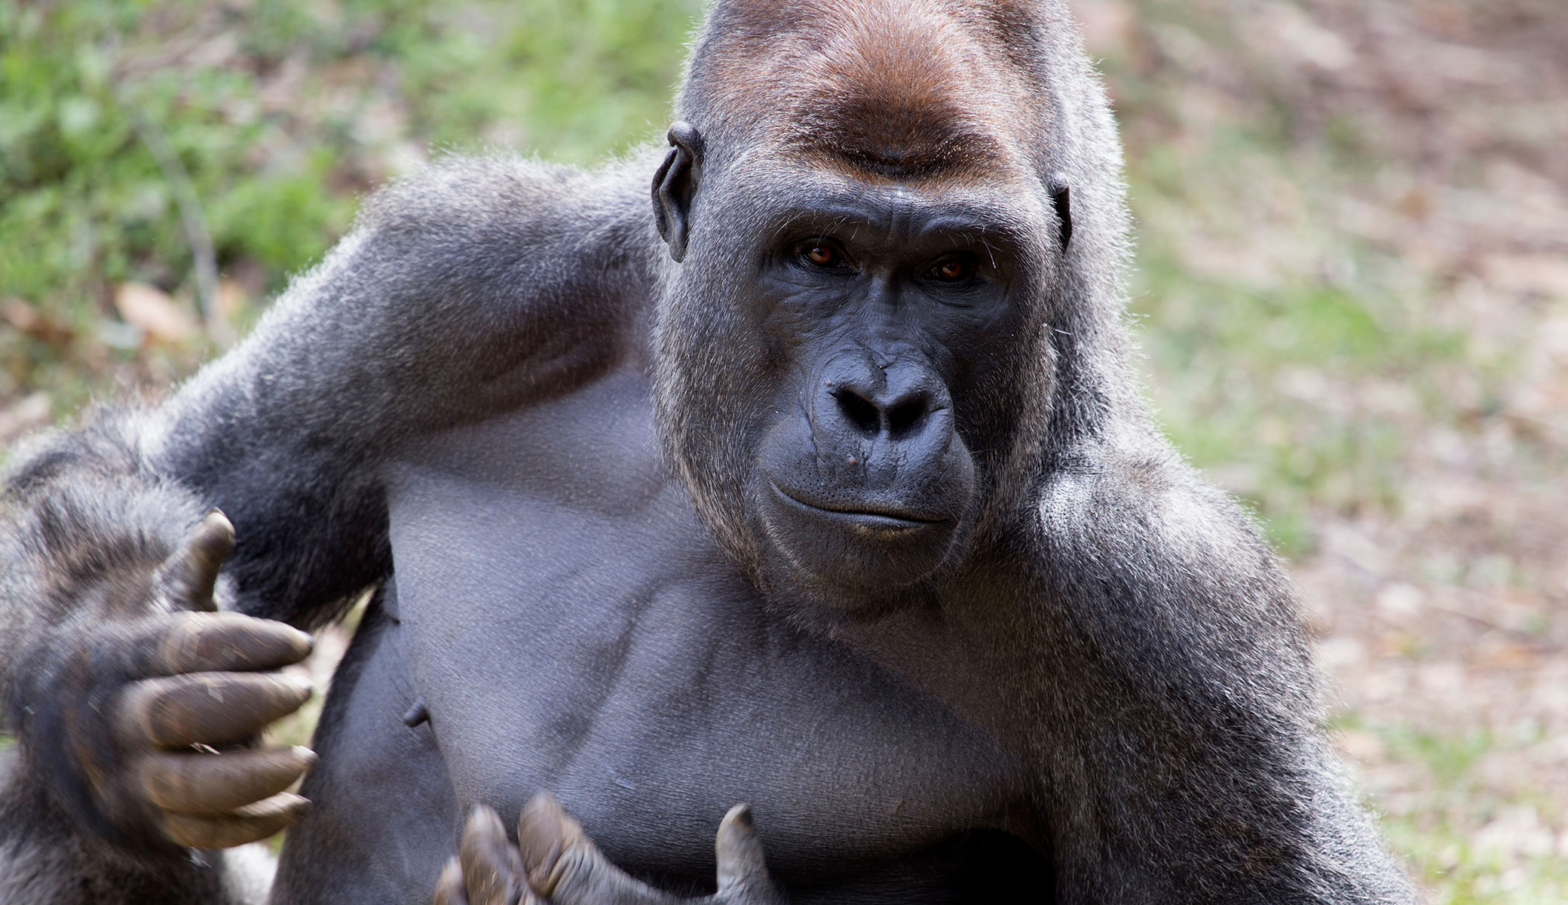 Charlie, one of the male gorillas at Zoo Atlanta, thumps his chest in his enclosure.